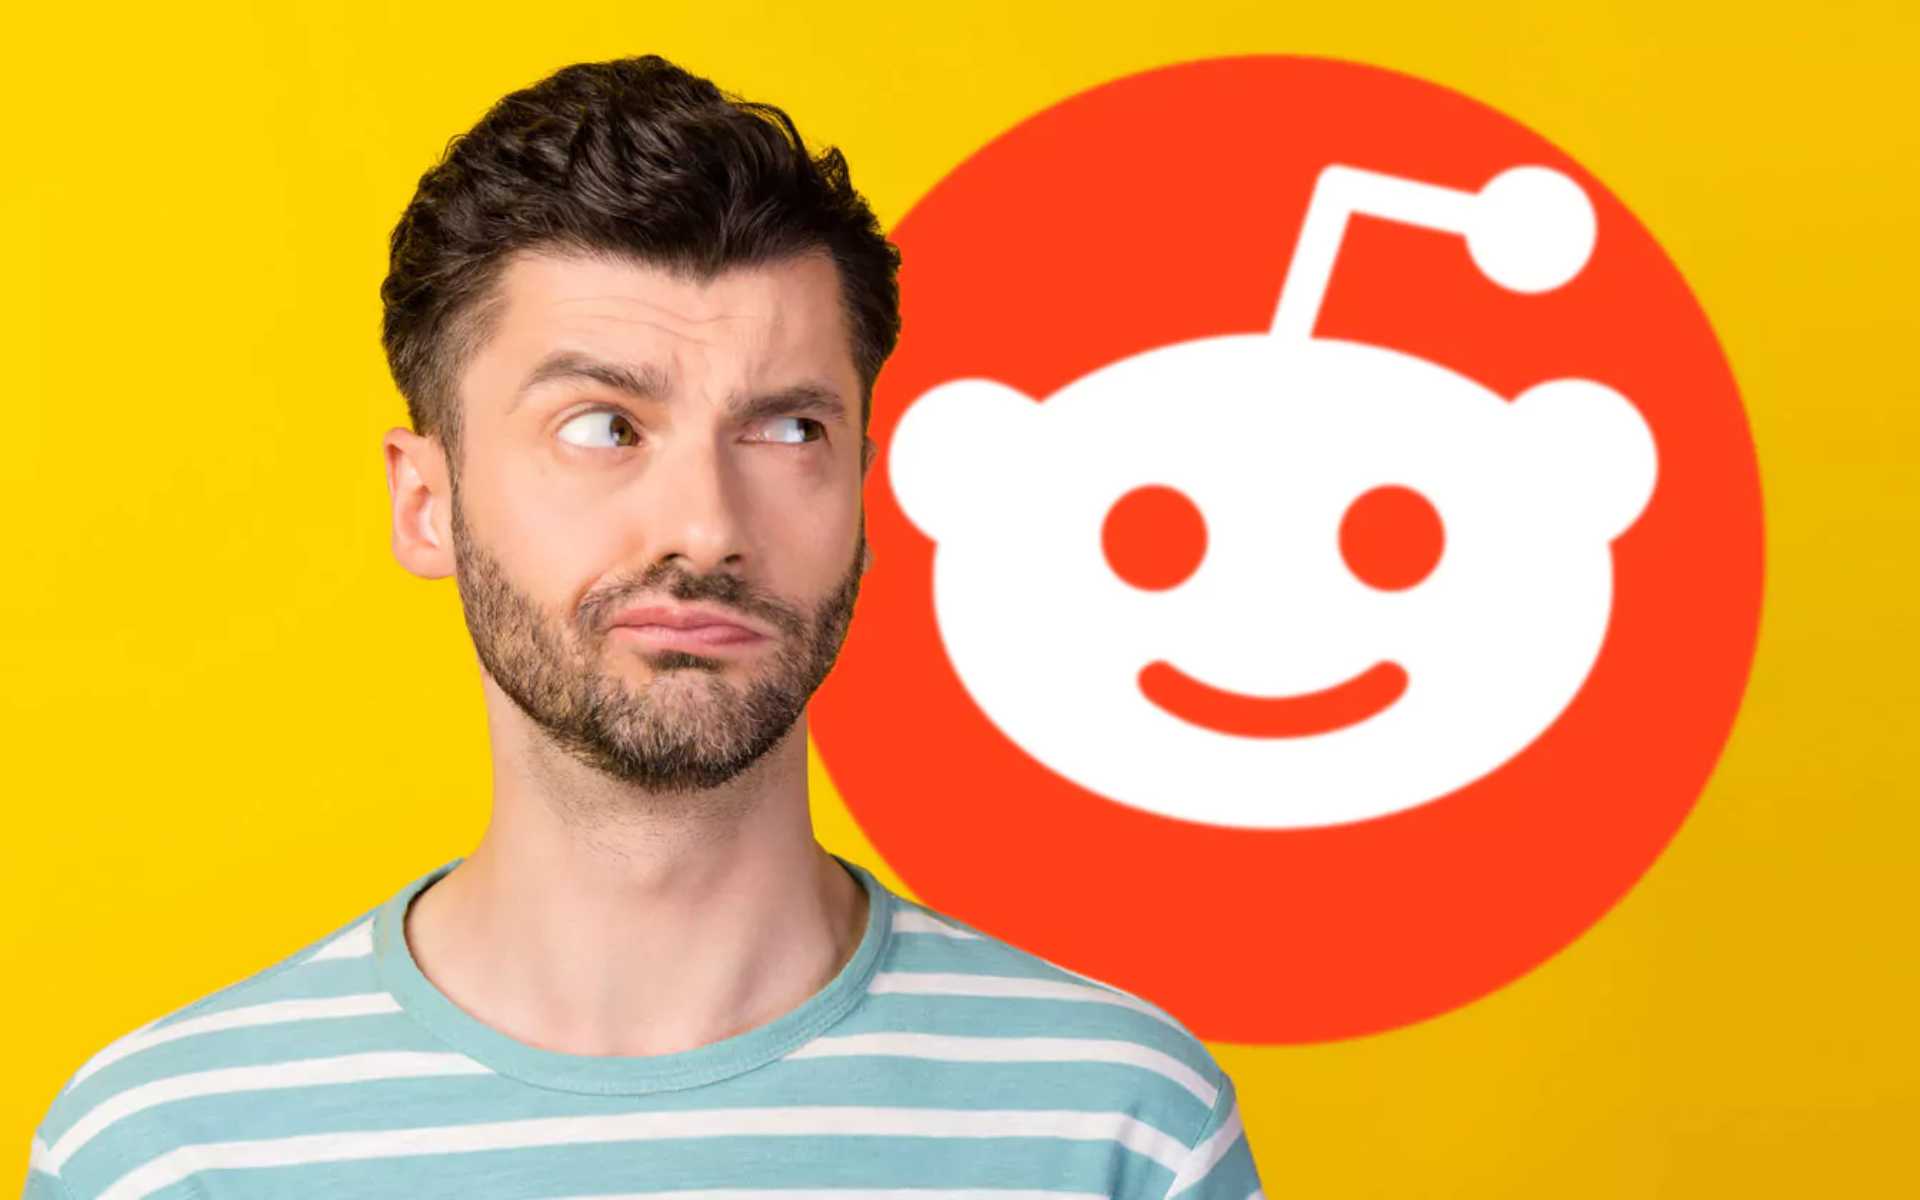 Let’s Be Real: Reddit In Google Search Lacks Credibility